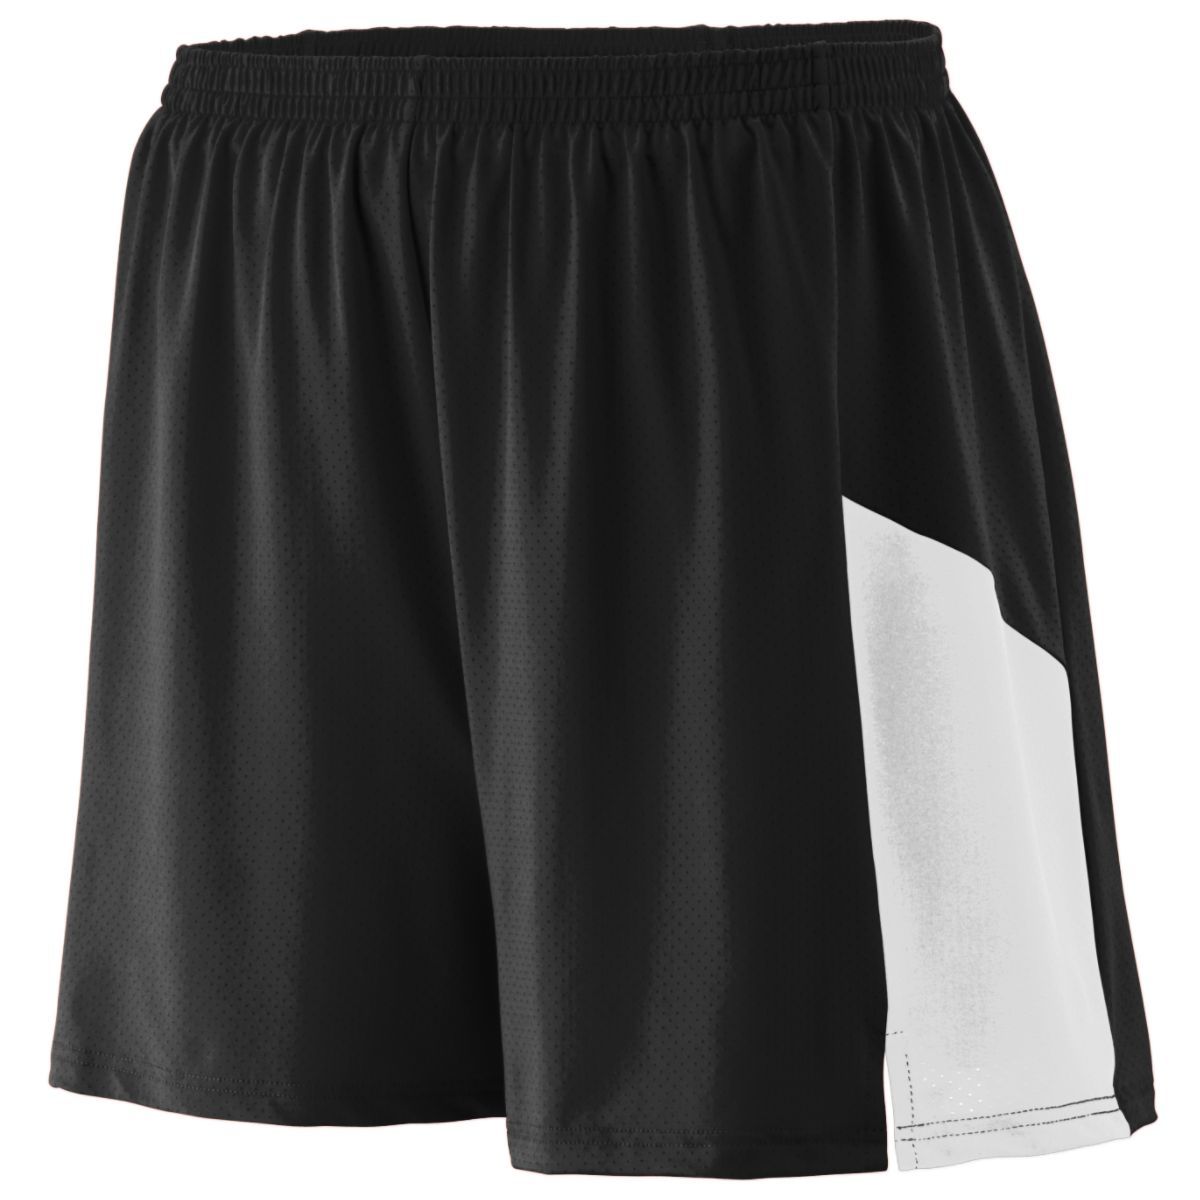 Augusta Sportswear Sprint Shorts in Black/White  -Part of the Adult, Adult-Shorts, Augusta-Products, Track-Field product lines at KanaleyCreations.com